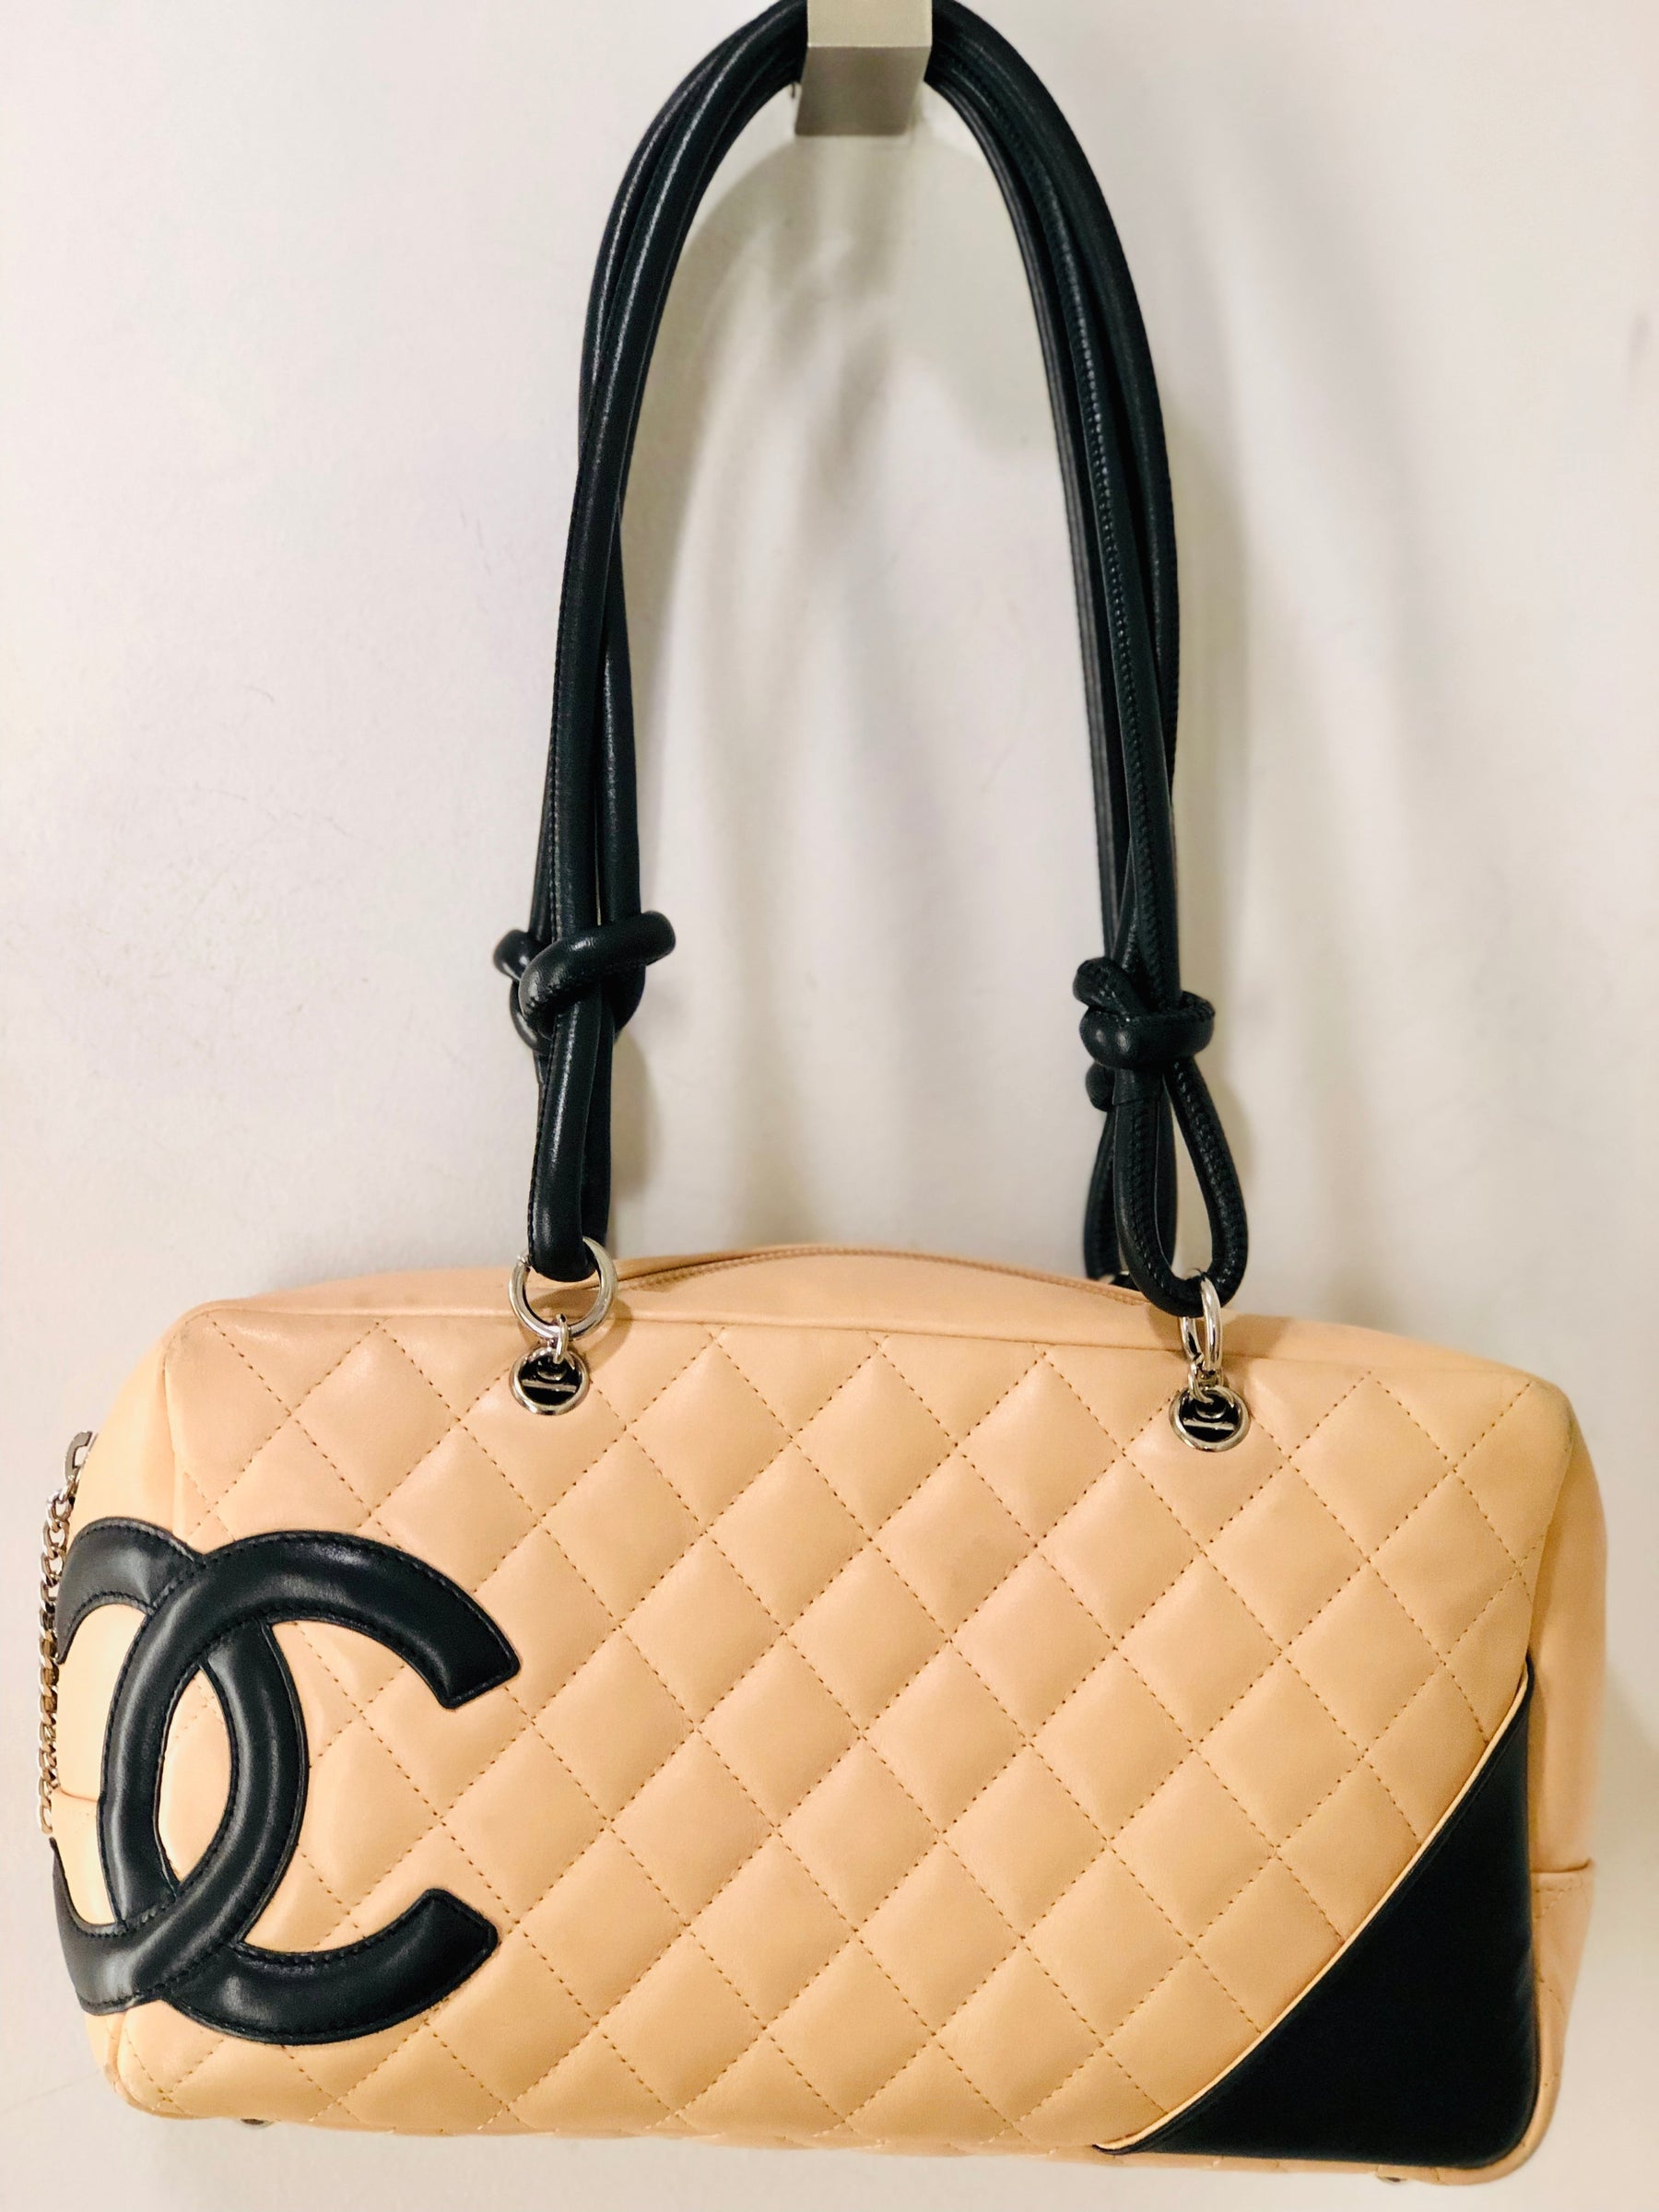 Chanel Cambon Bowler Leather Bag Tan and Black Front of Bag